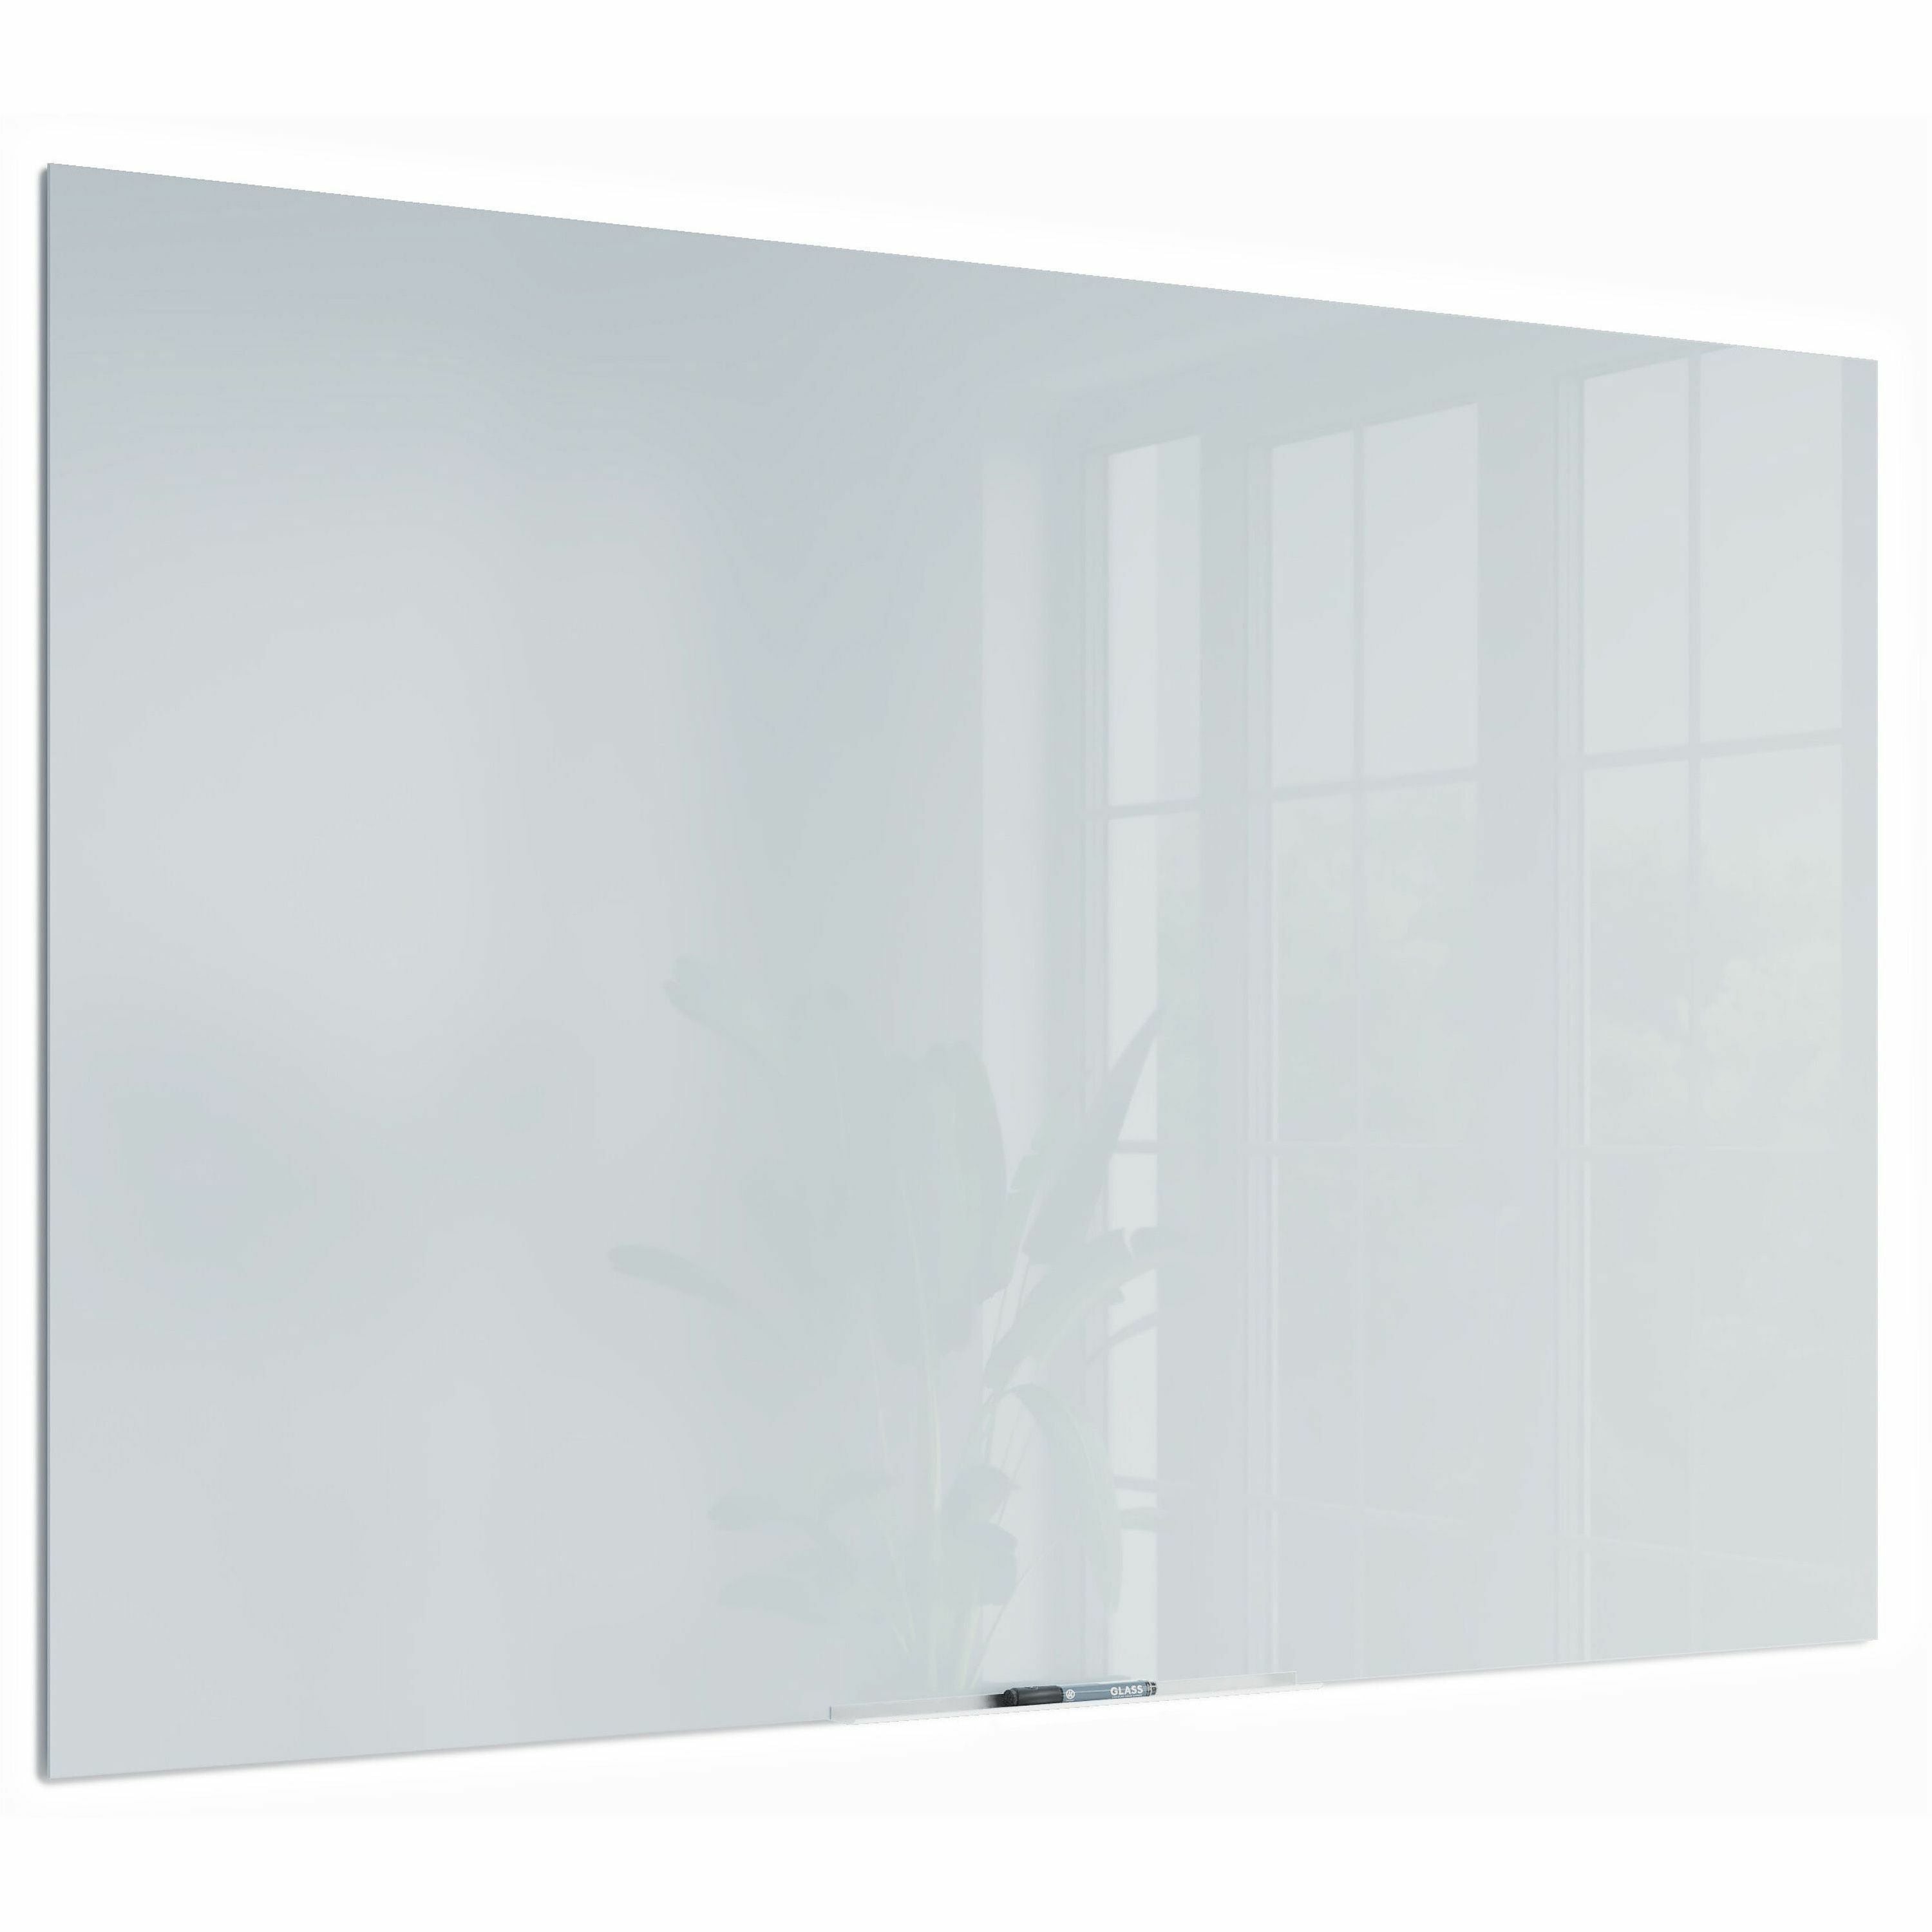 u-brands-floating-glass-dry-erase-board-47-39-ft-width-x-70-58-ft-height-frosted-white-tempered-glass-surface-rectangle-horizontal-vertical-1-each_ubr2780u0001 - 2